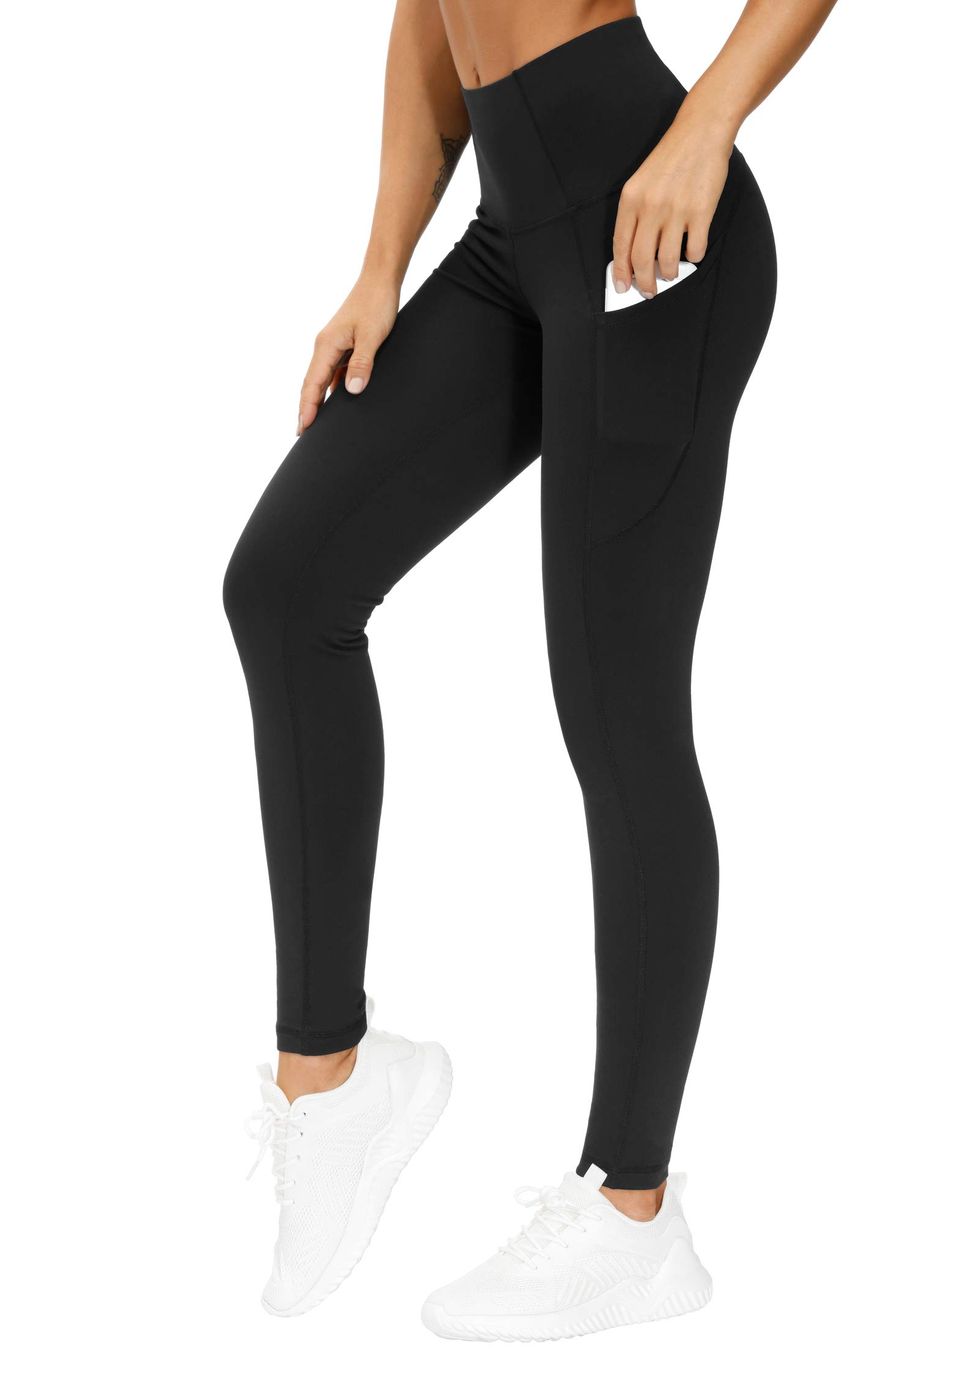 20 Best Tummy Control Leggings in 2022: High Waisted, Workout & More